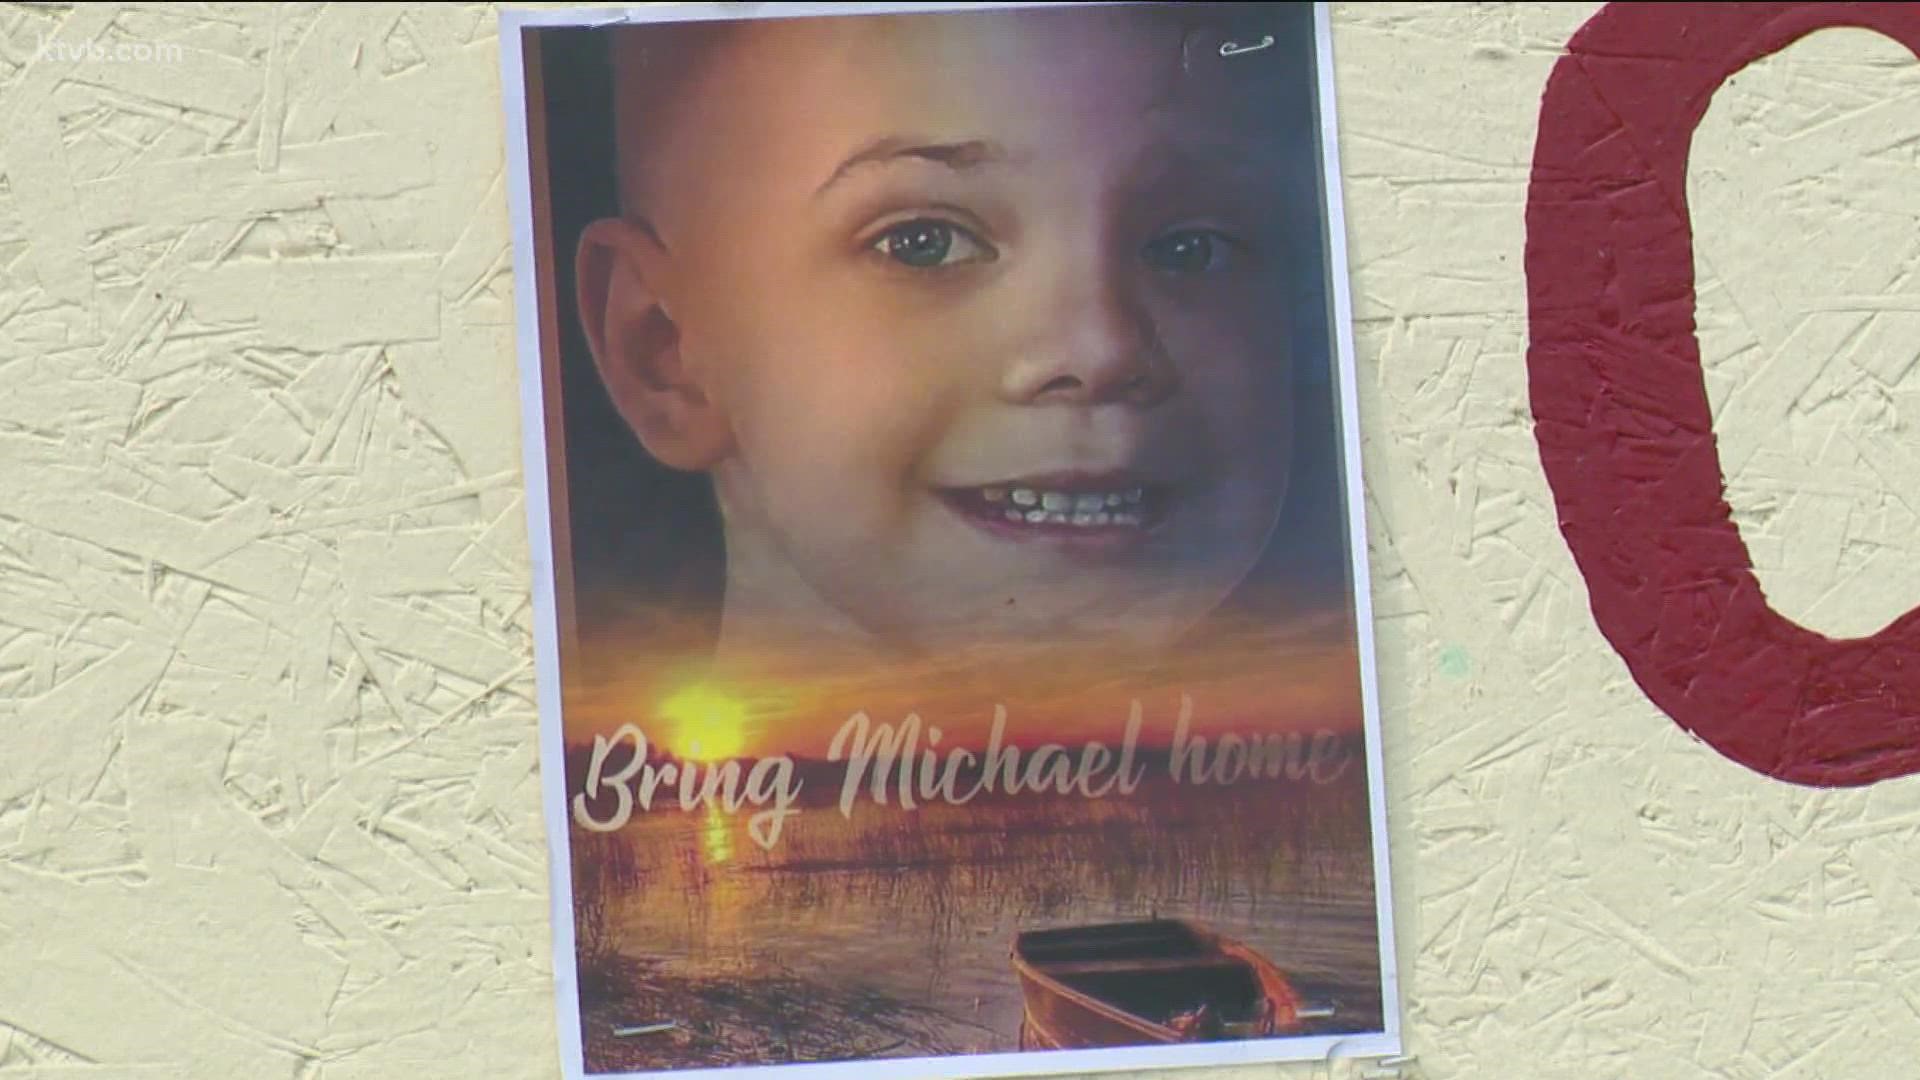 The motorcycle community in the Treasure Valley organized a ride Friday to show Michael Vaughan's family they are there for them.